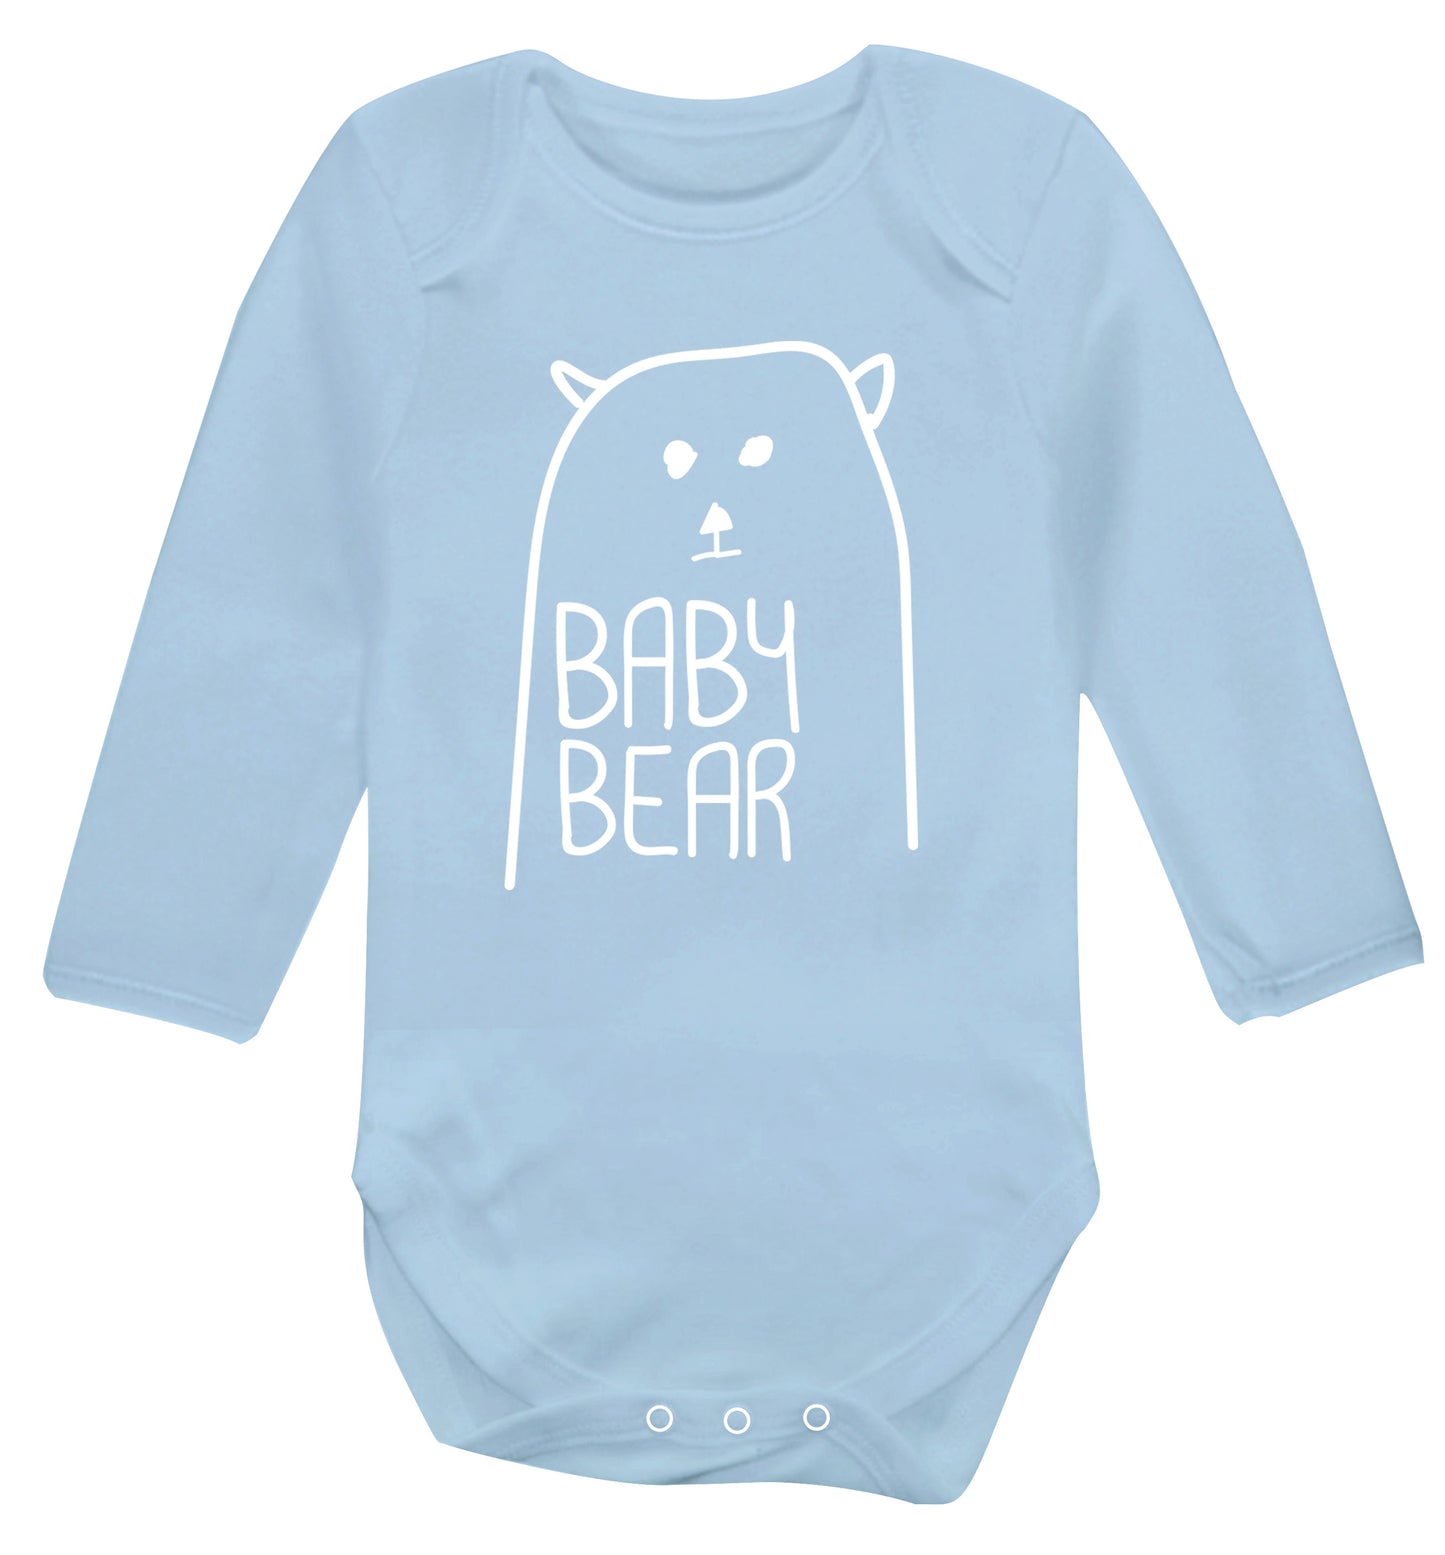 Baby bear Baby Vest long sleeved pale blue 6-12 months